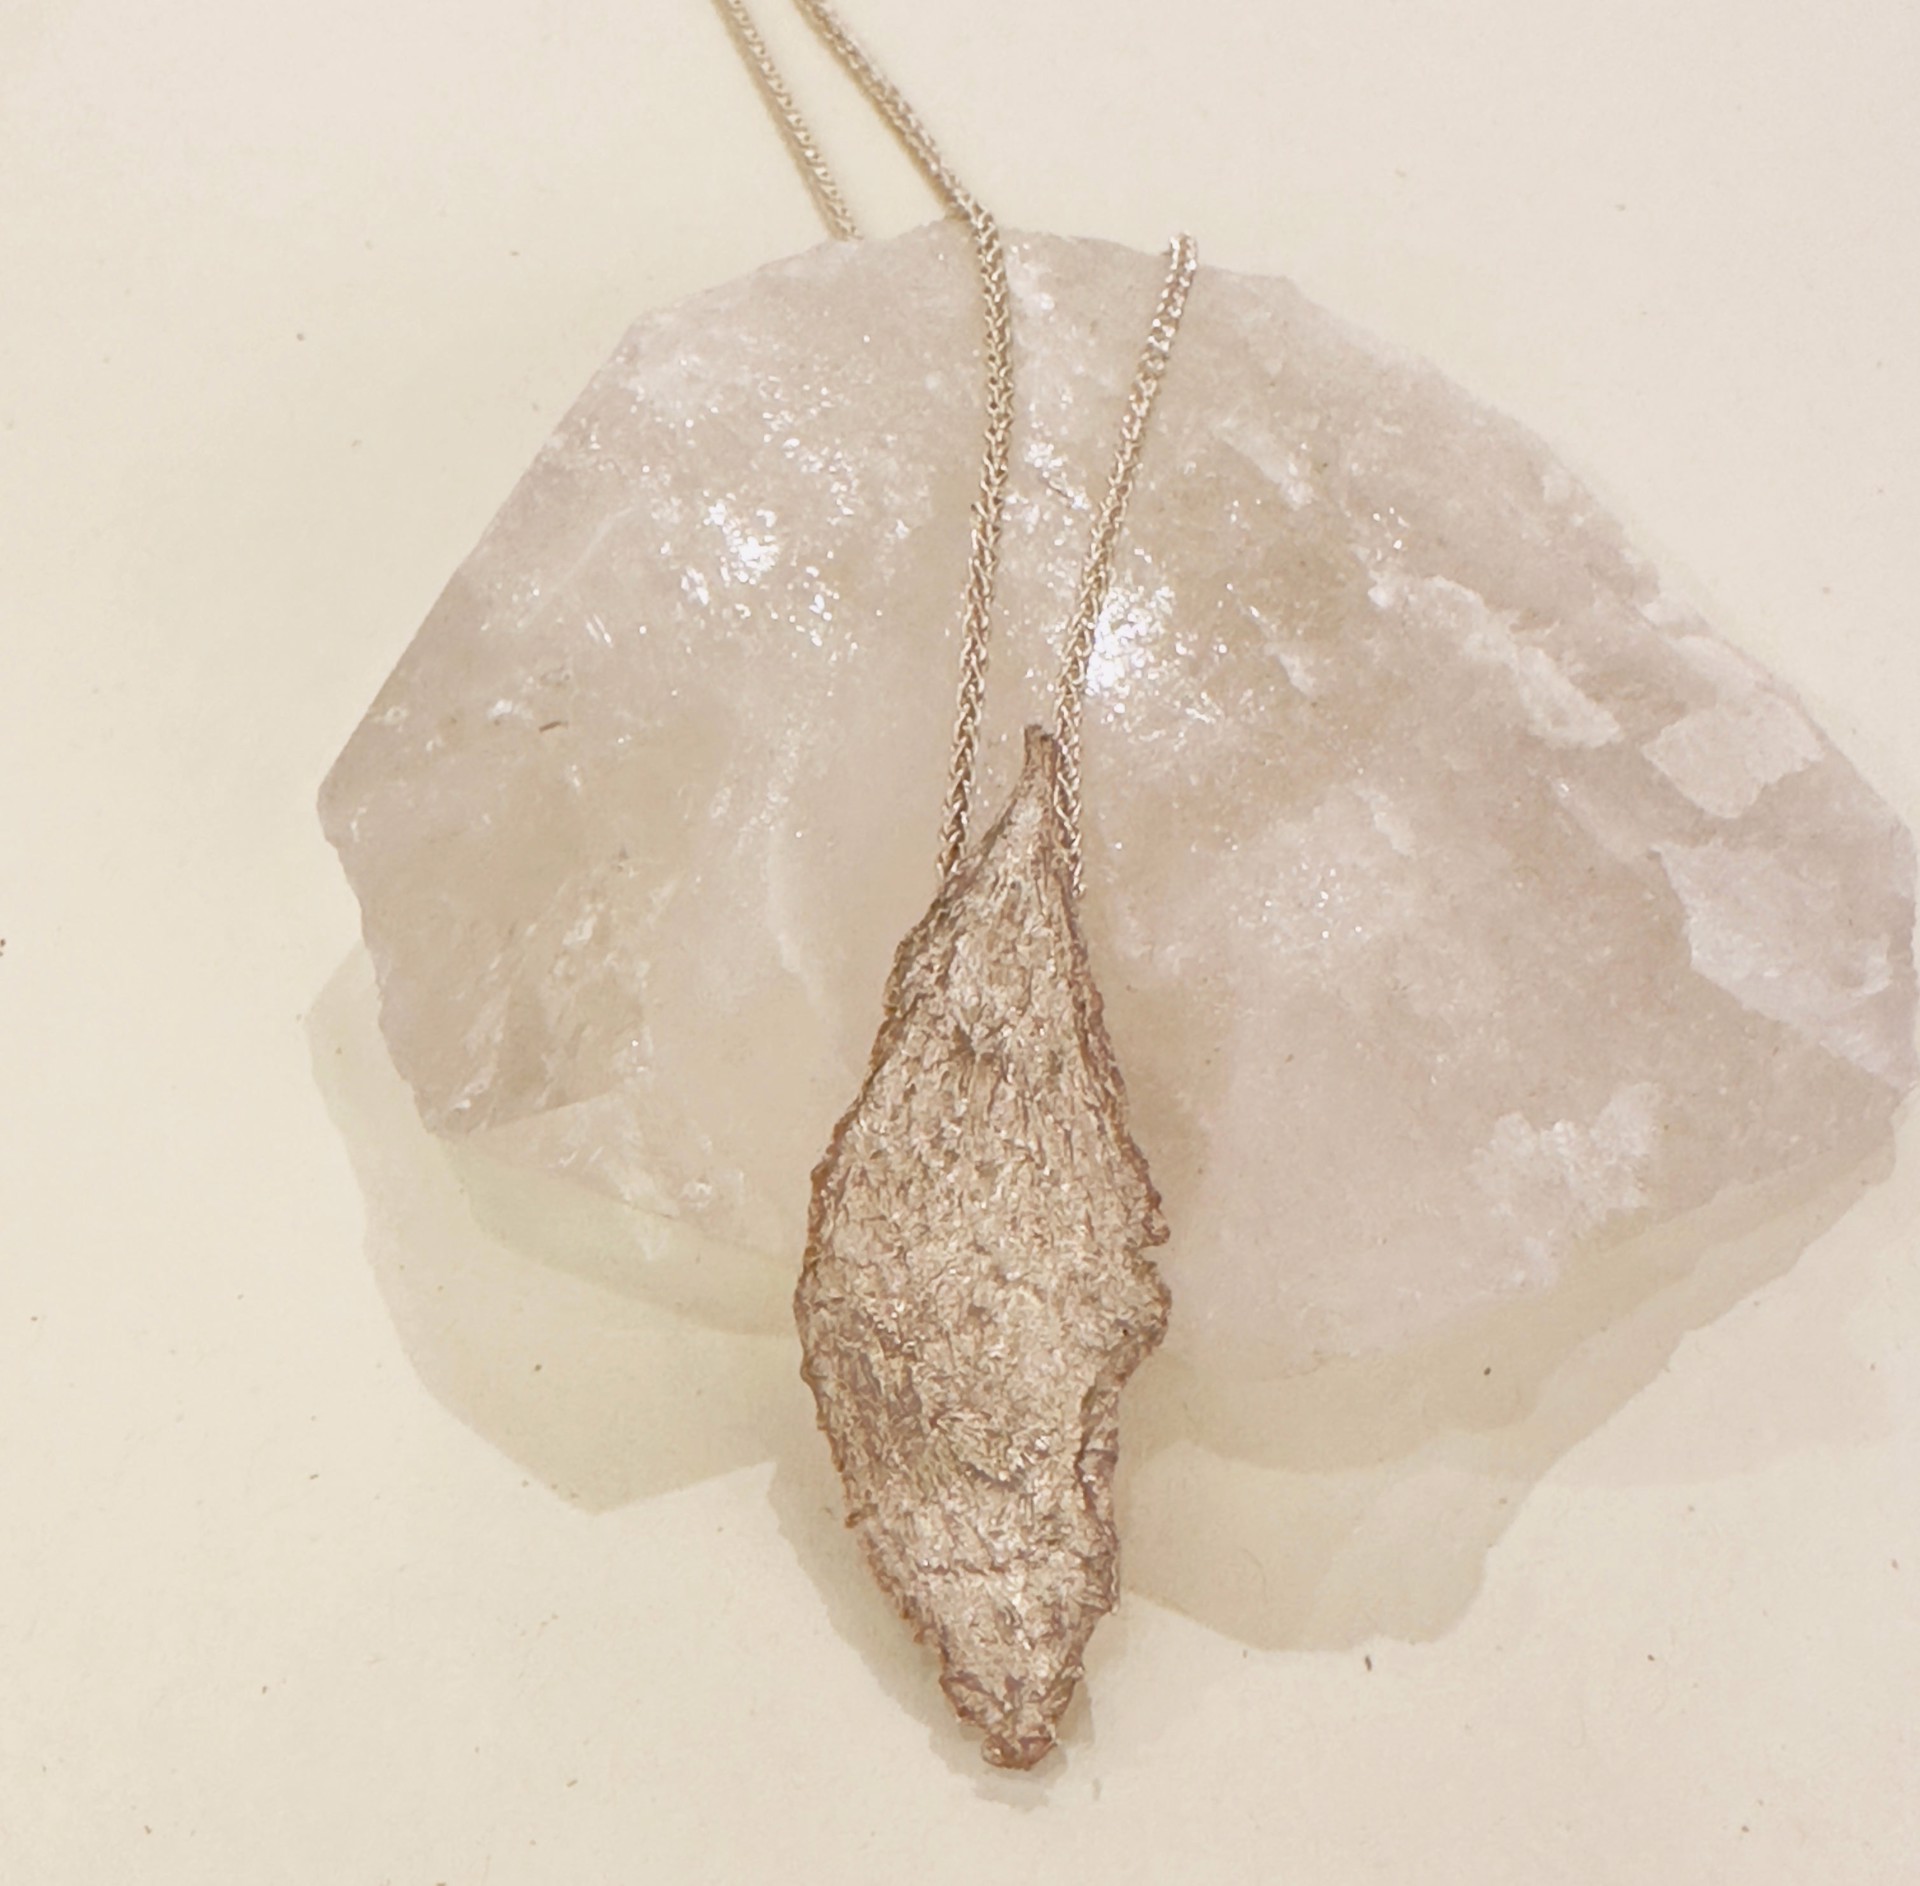 Silver Cast Tea Leaf Necklace by Clementine & Co. Jewelry